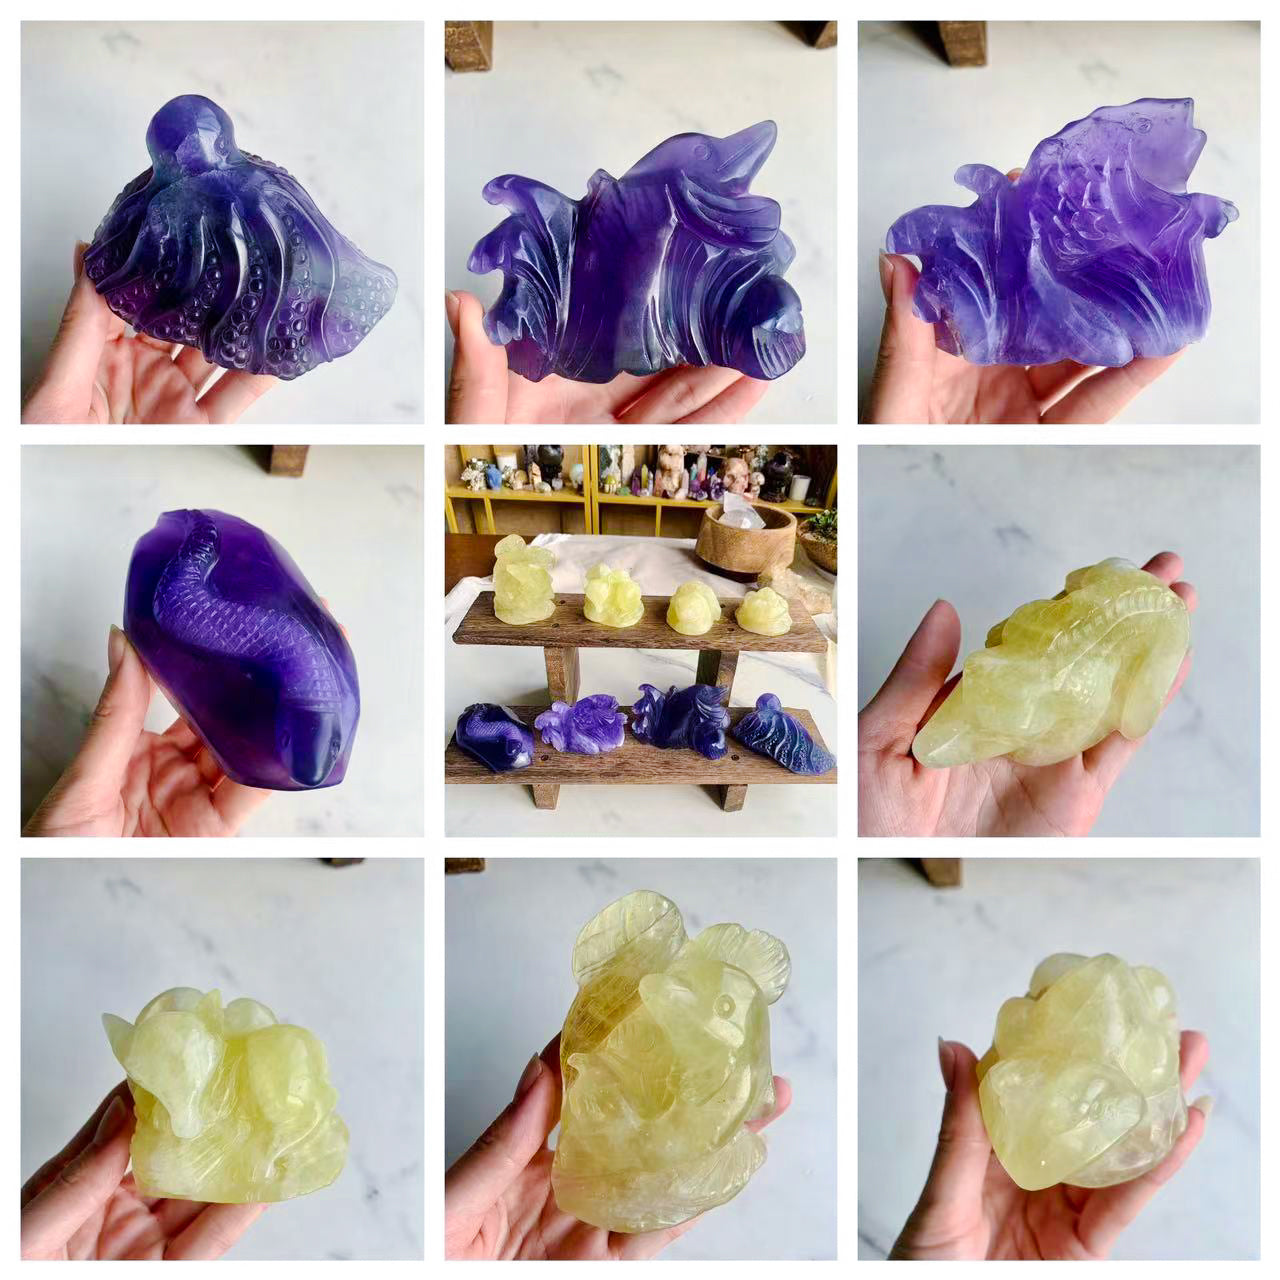 【Weekly Flash Deals】Fluorite/Citrine Carving